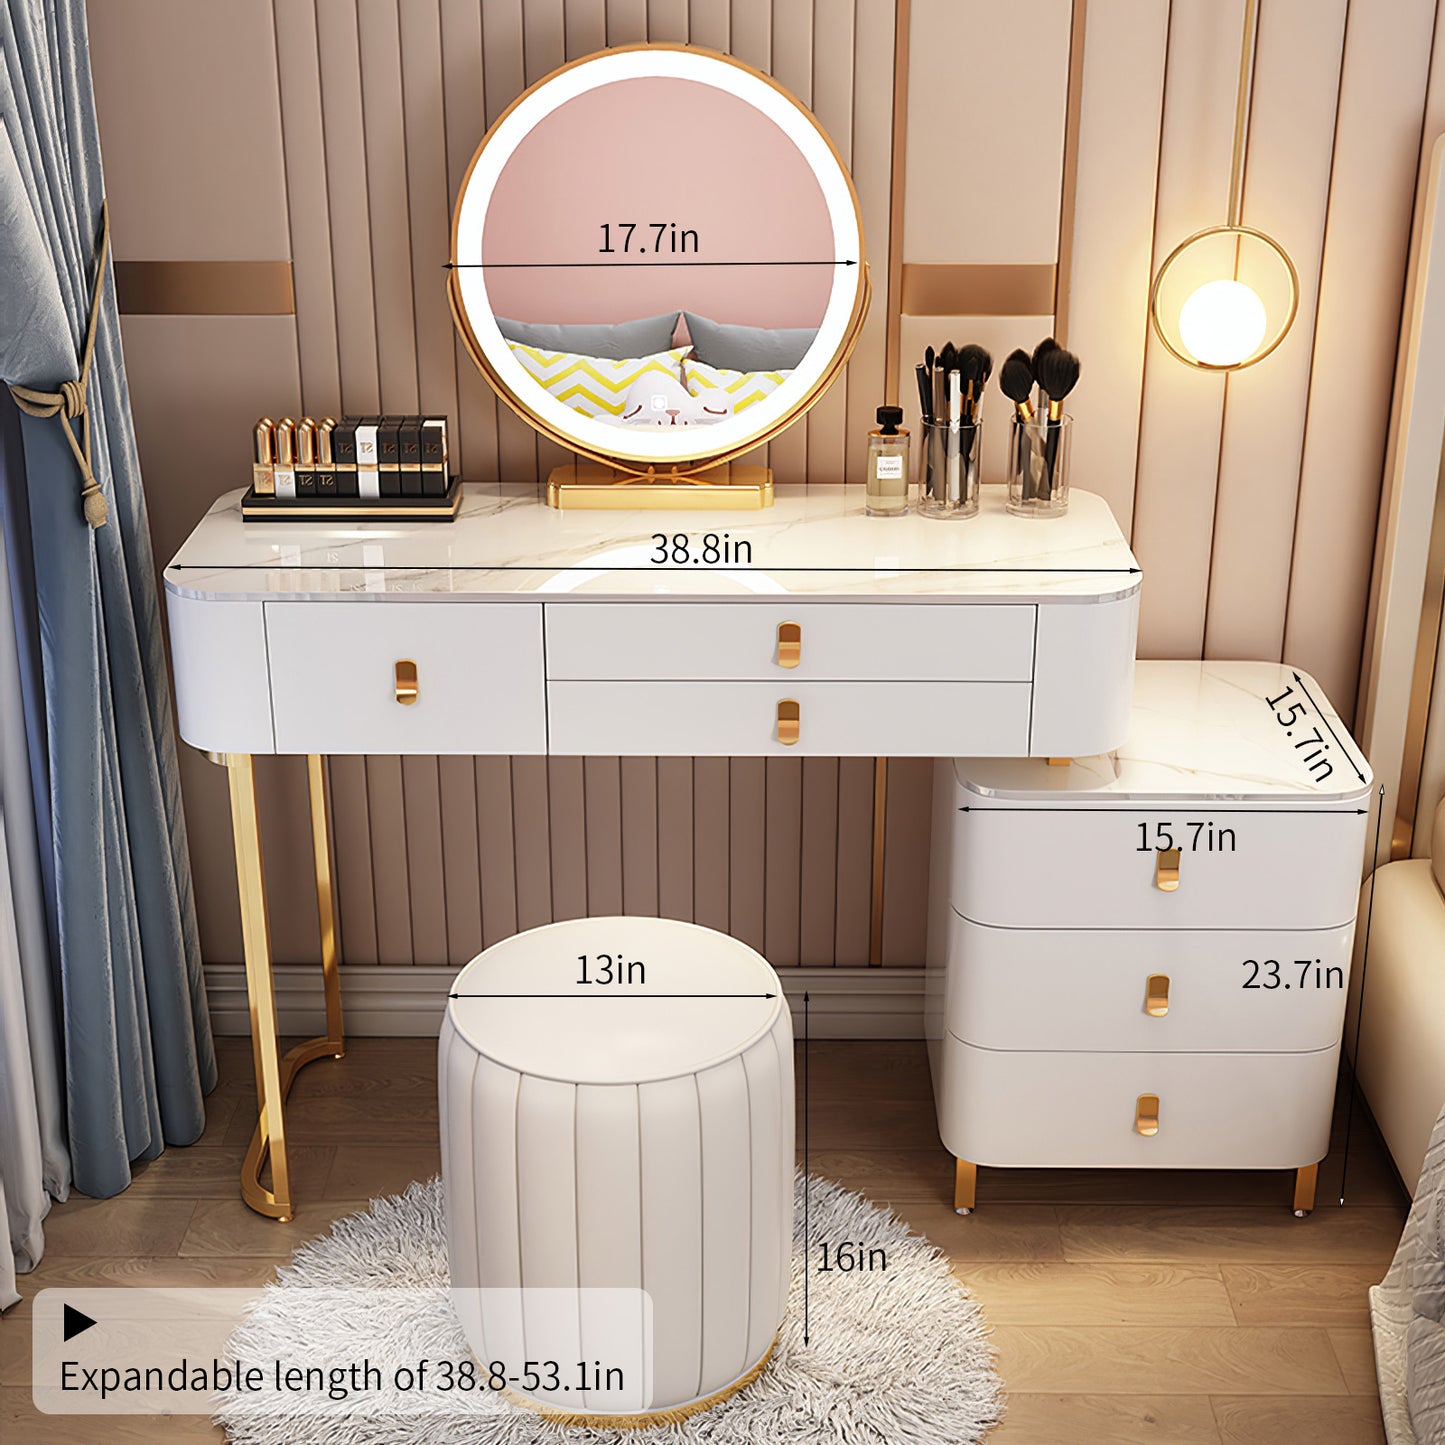 Classic curved upholstered cream-themed makeup vanity with a round stool set